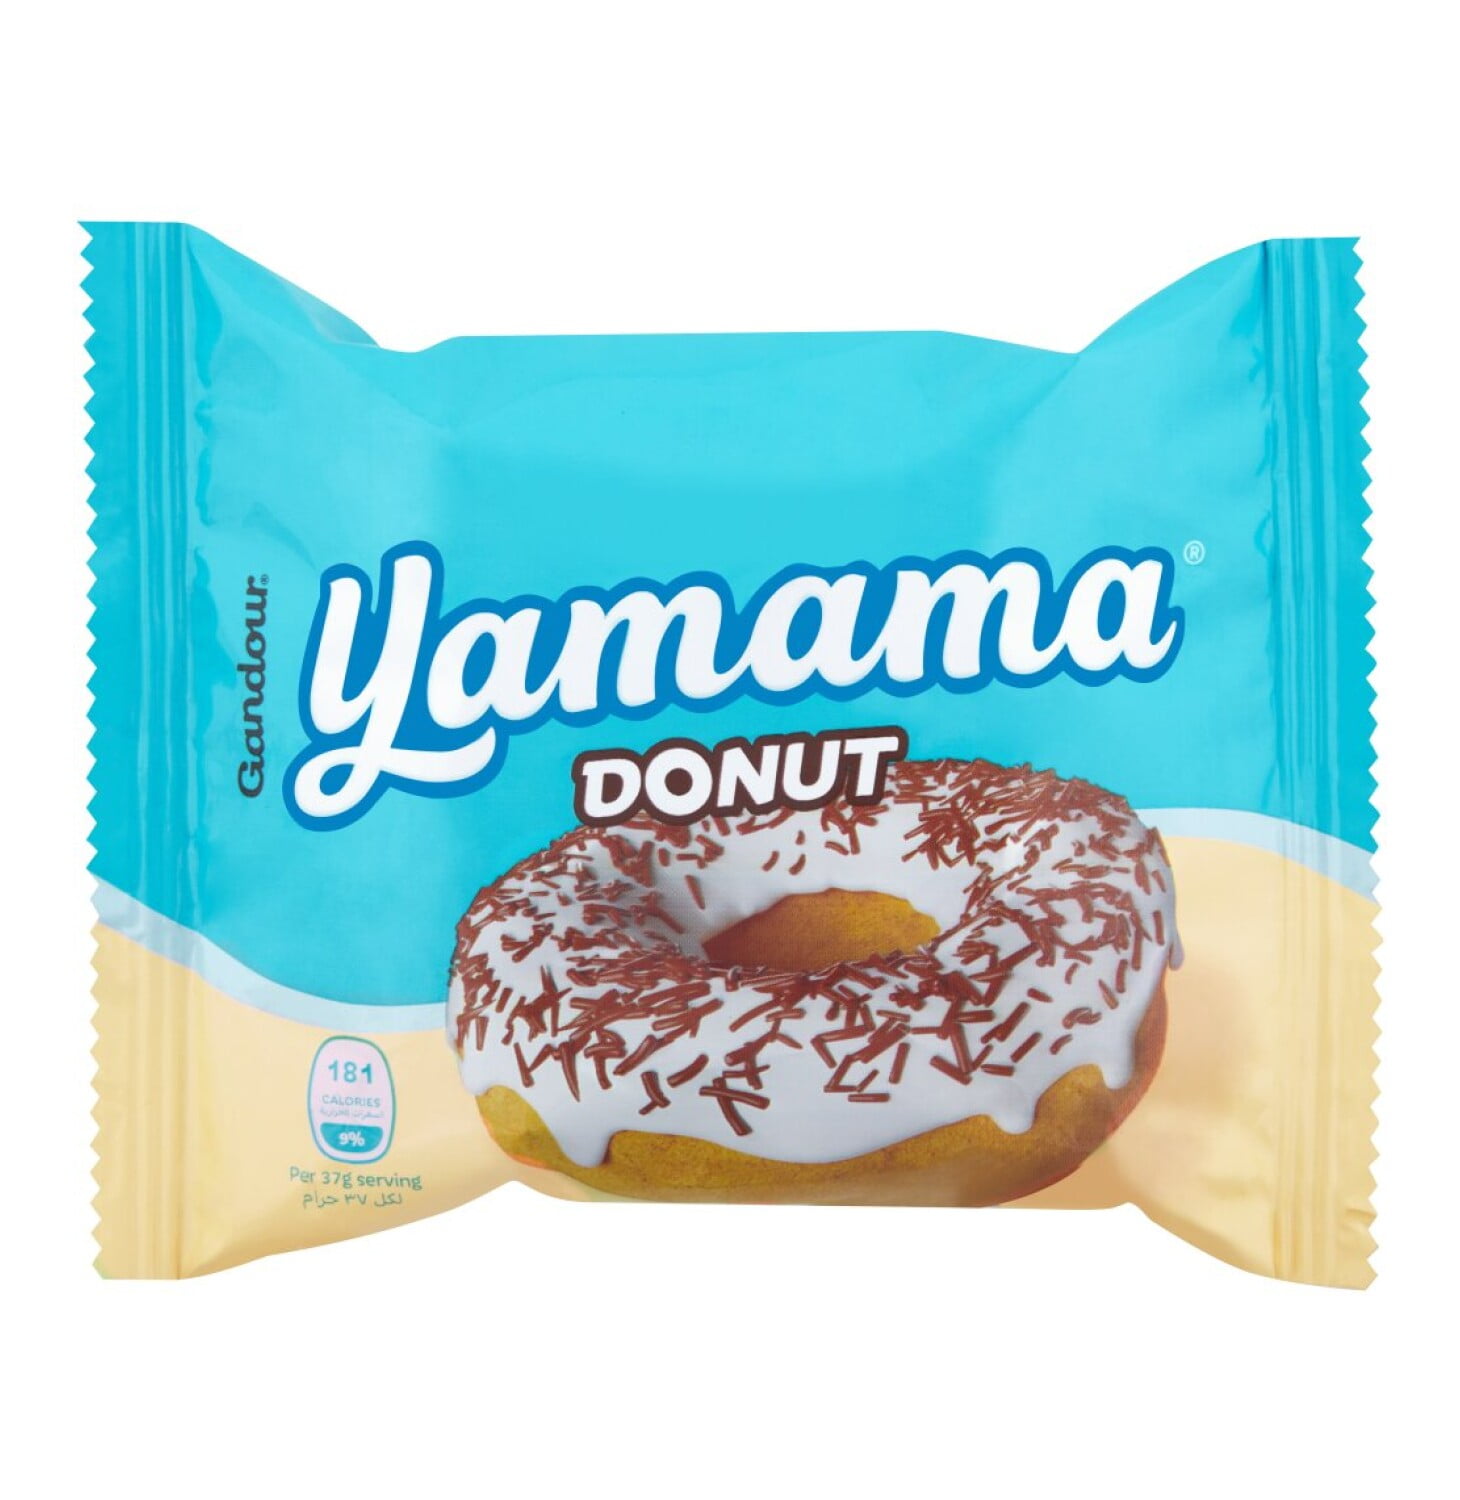 Yamama Cake and Donut – Als Wat Lekker Is